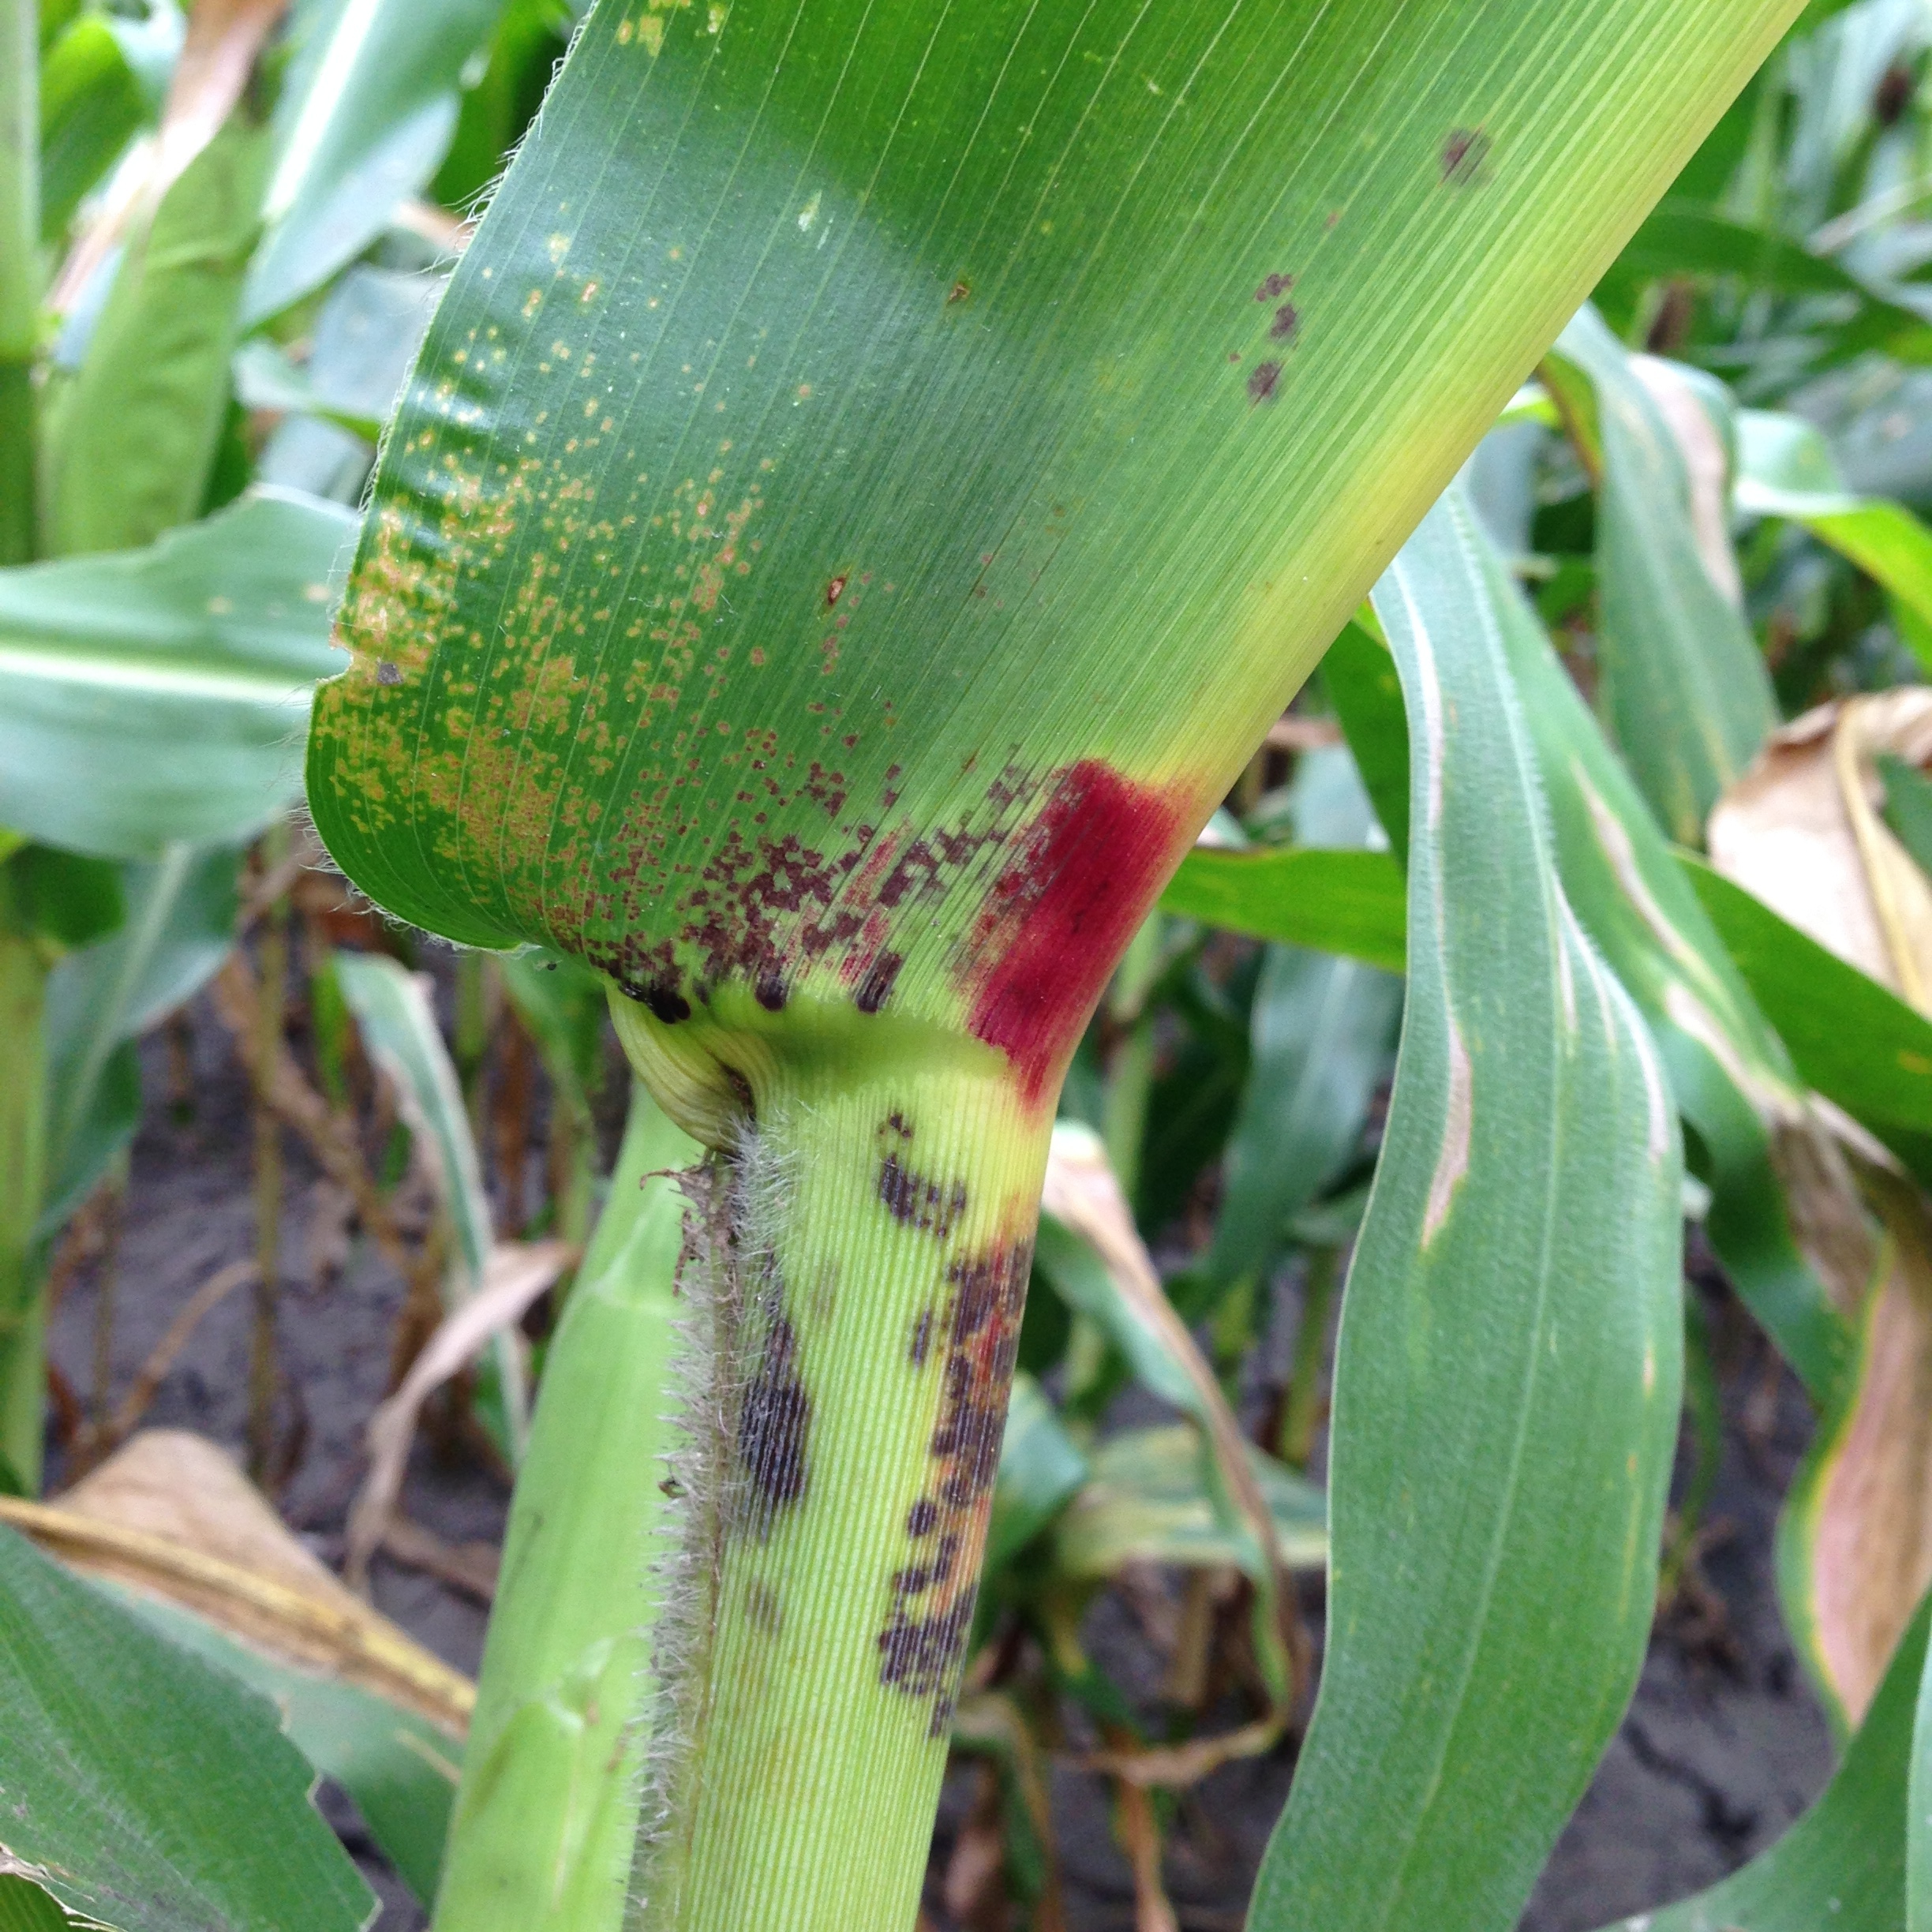 Physoderma brown spot symptoms also may occur on the stalk, leaf sheath, and husks.